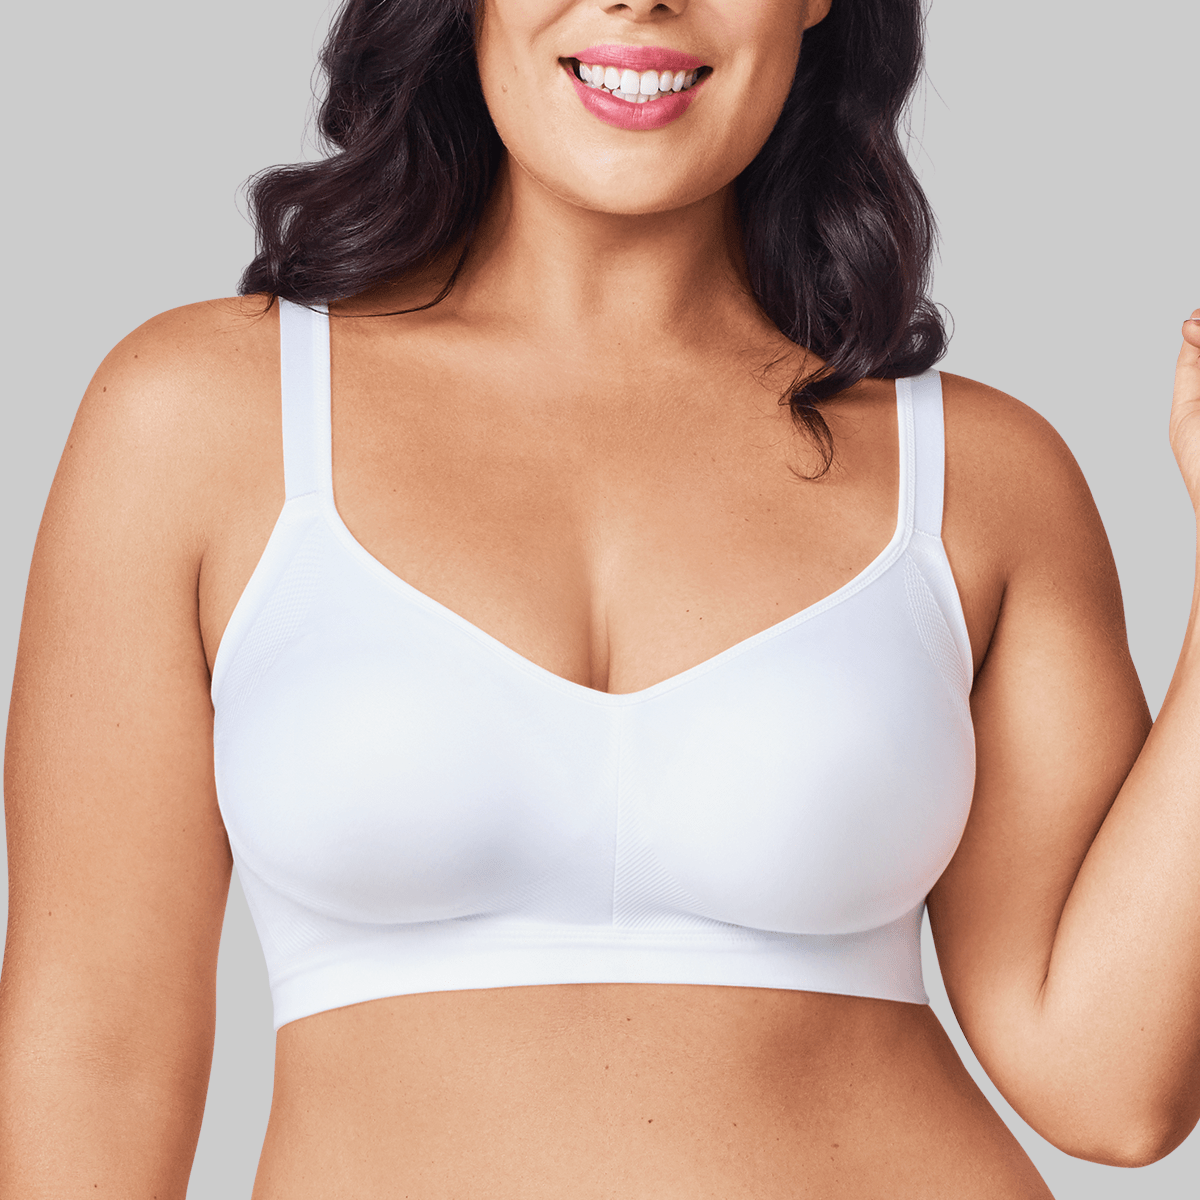 Olga Women's Easy Does It Wire-free No Bulge T-shirt Bra - Gm3911a S  Toasted Almond : Target